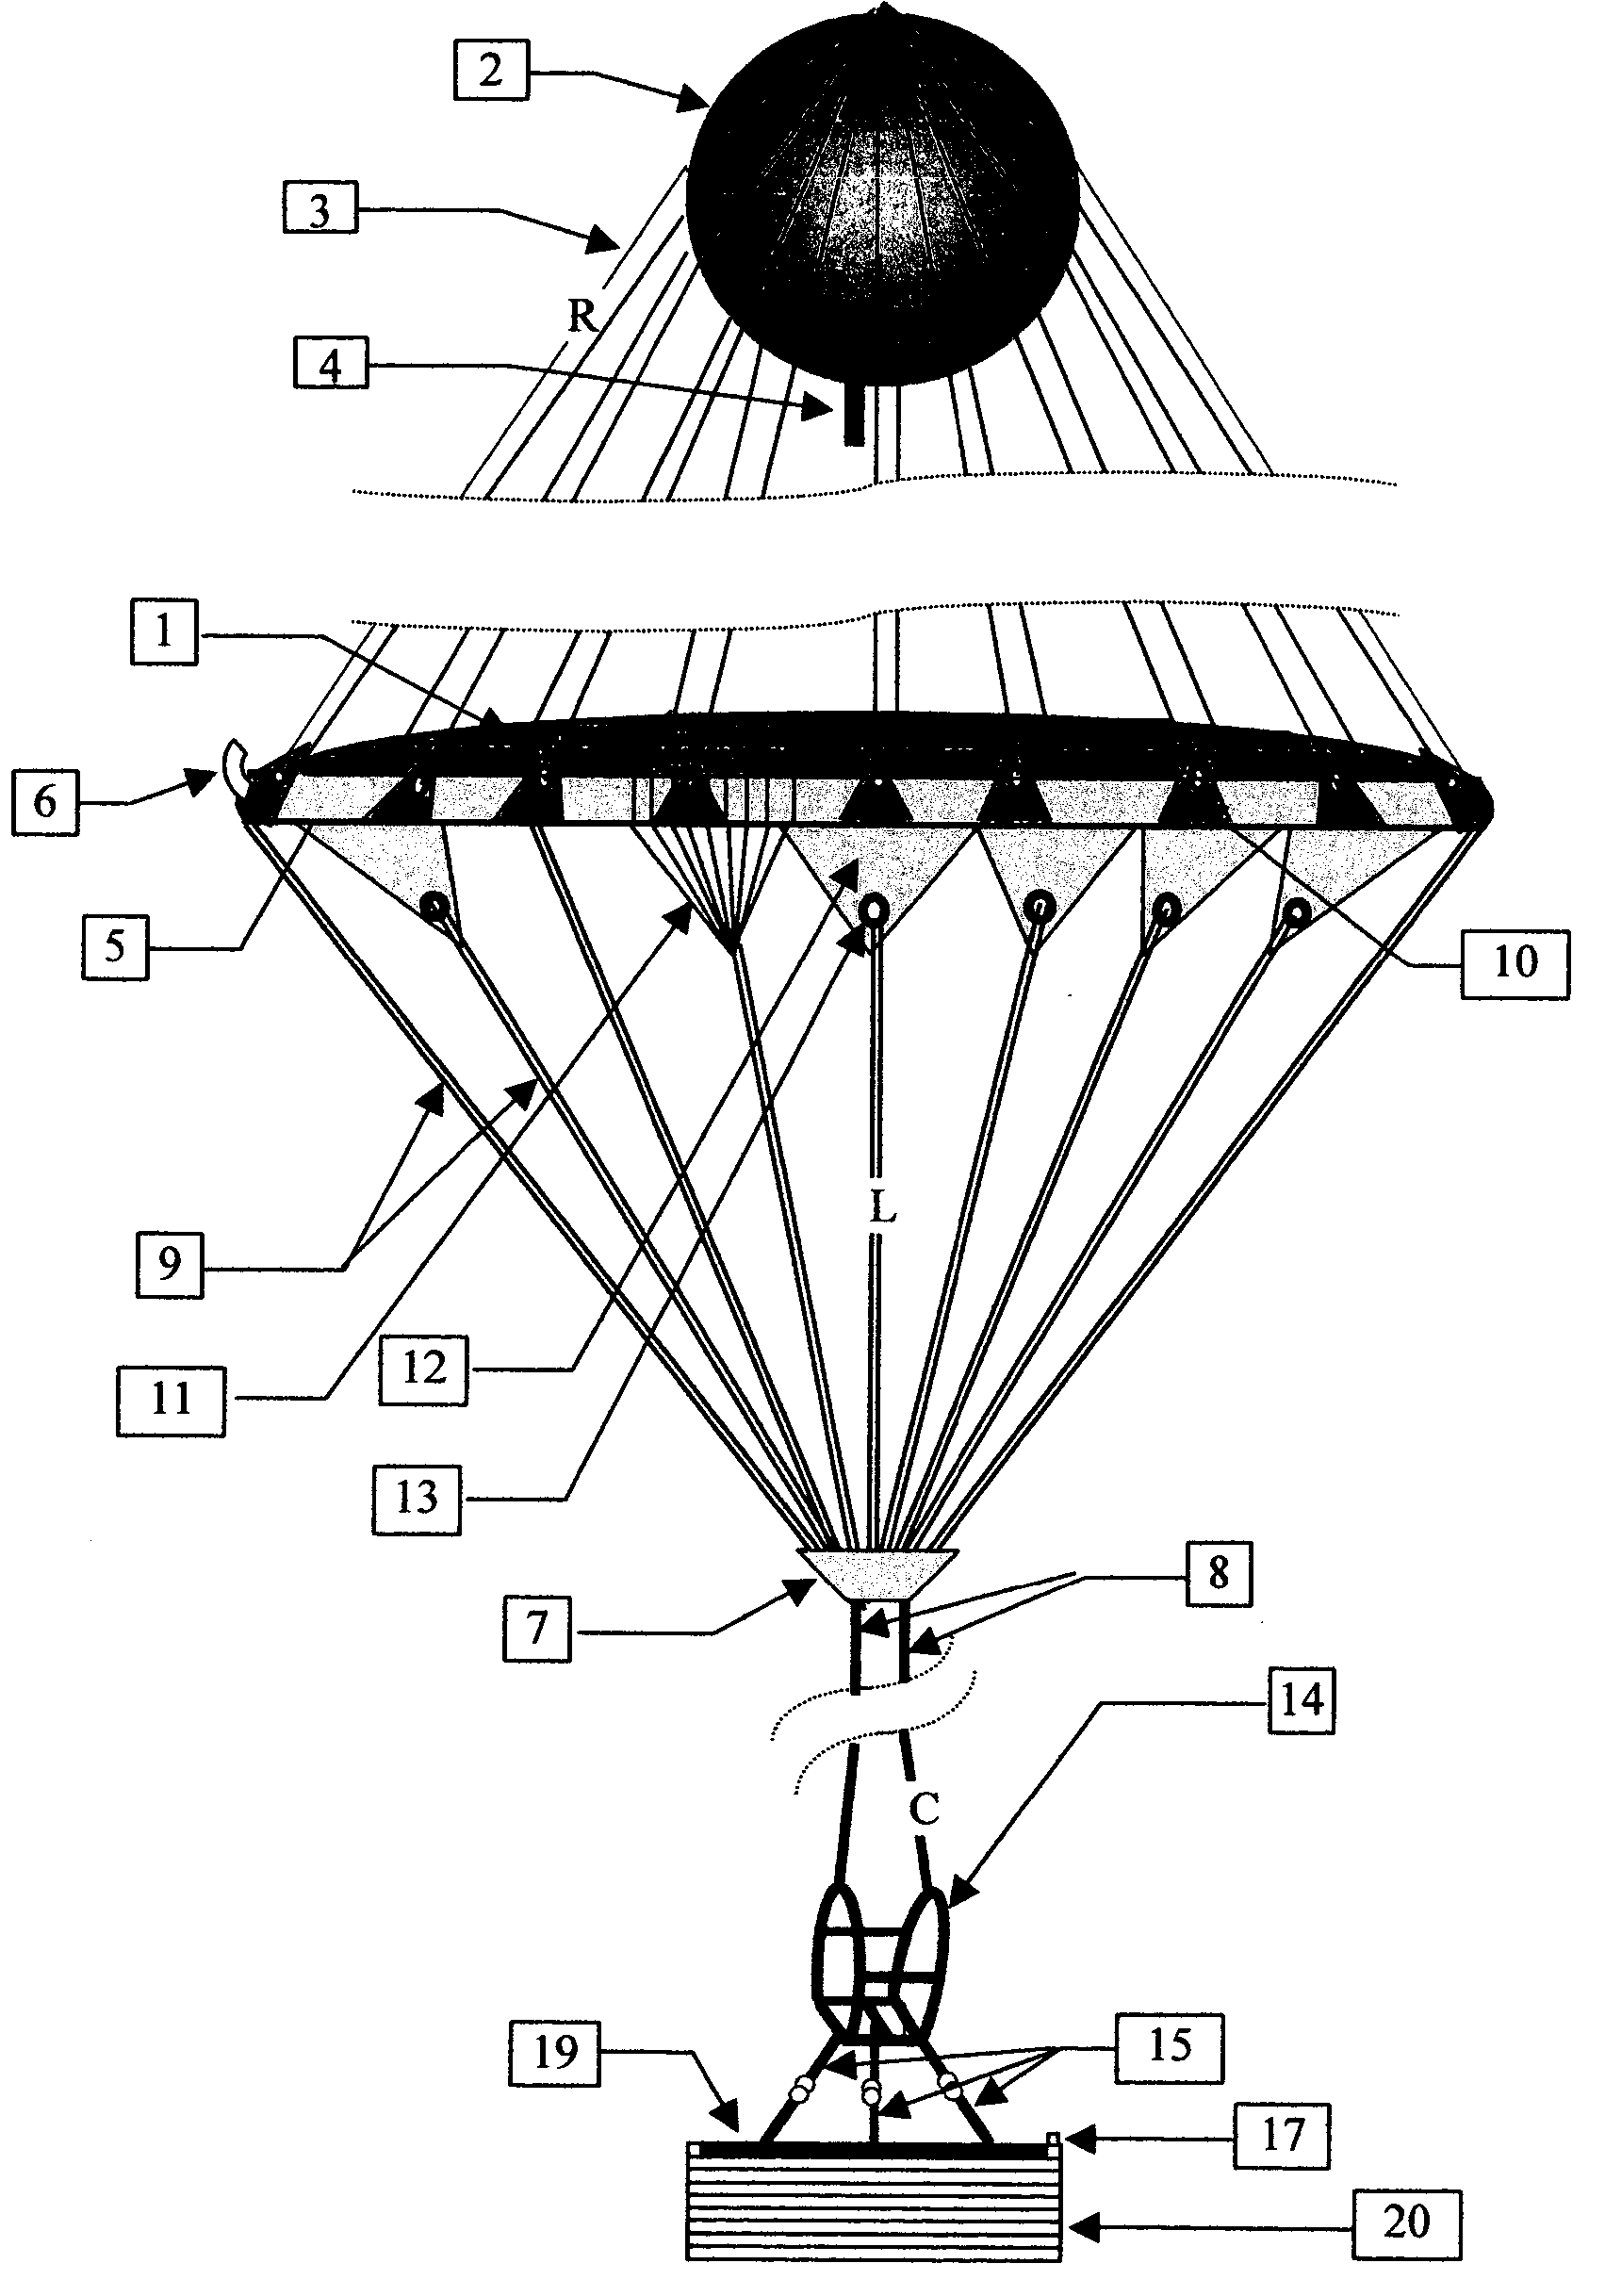 Inflatable parachute for very low altitude jumping and method for delivering same to a person in need